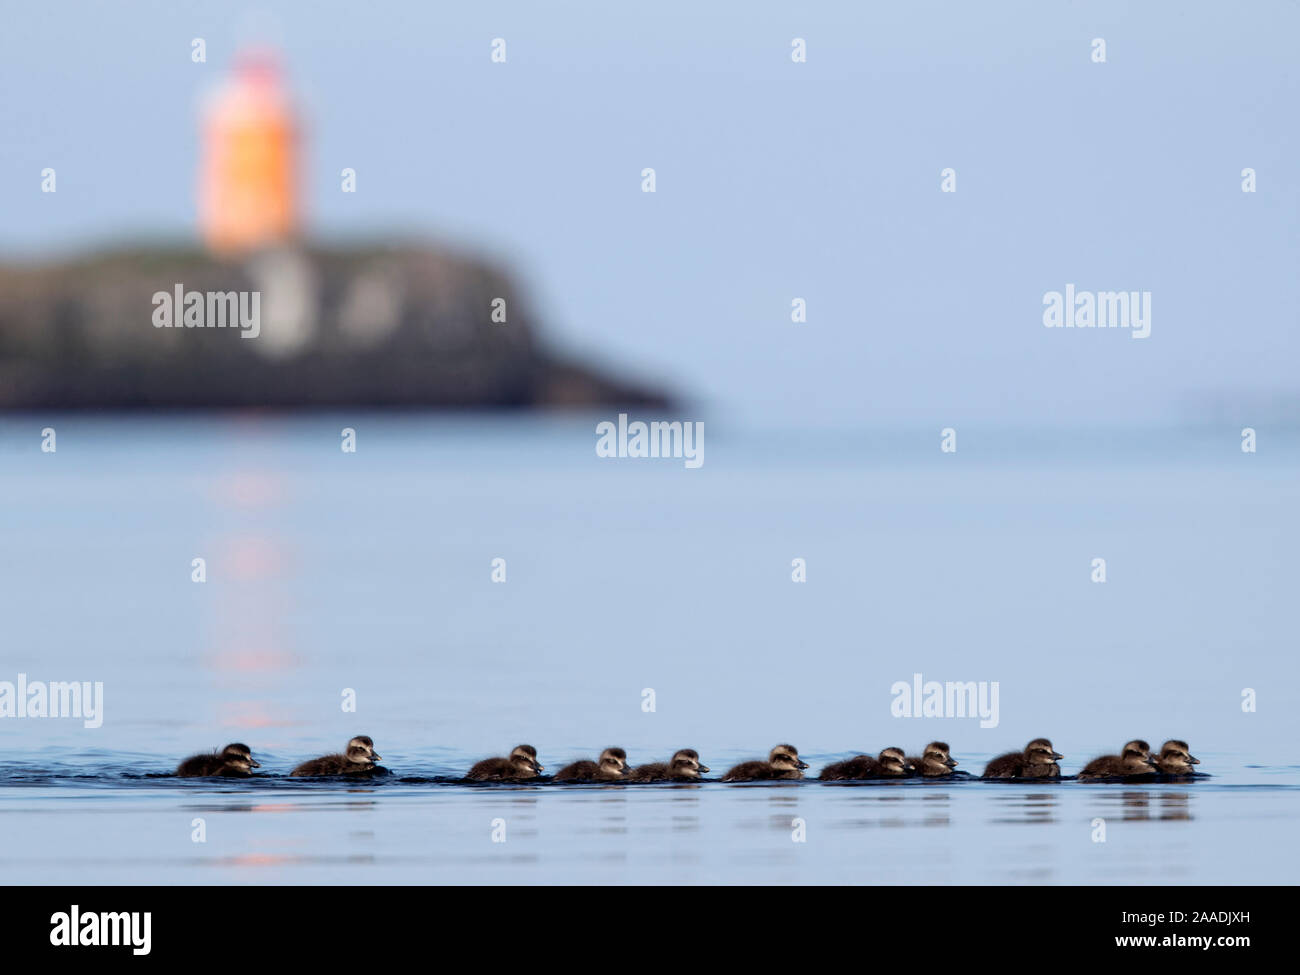 Common eider (Somateria mollissima) ducklings, Flatey, Iceland.  June 2016. Winner of the Portfolio Award of the Terre Sauvage Nature Images Awards Competition 2017. Stock Photo